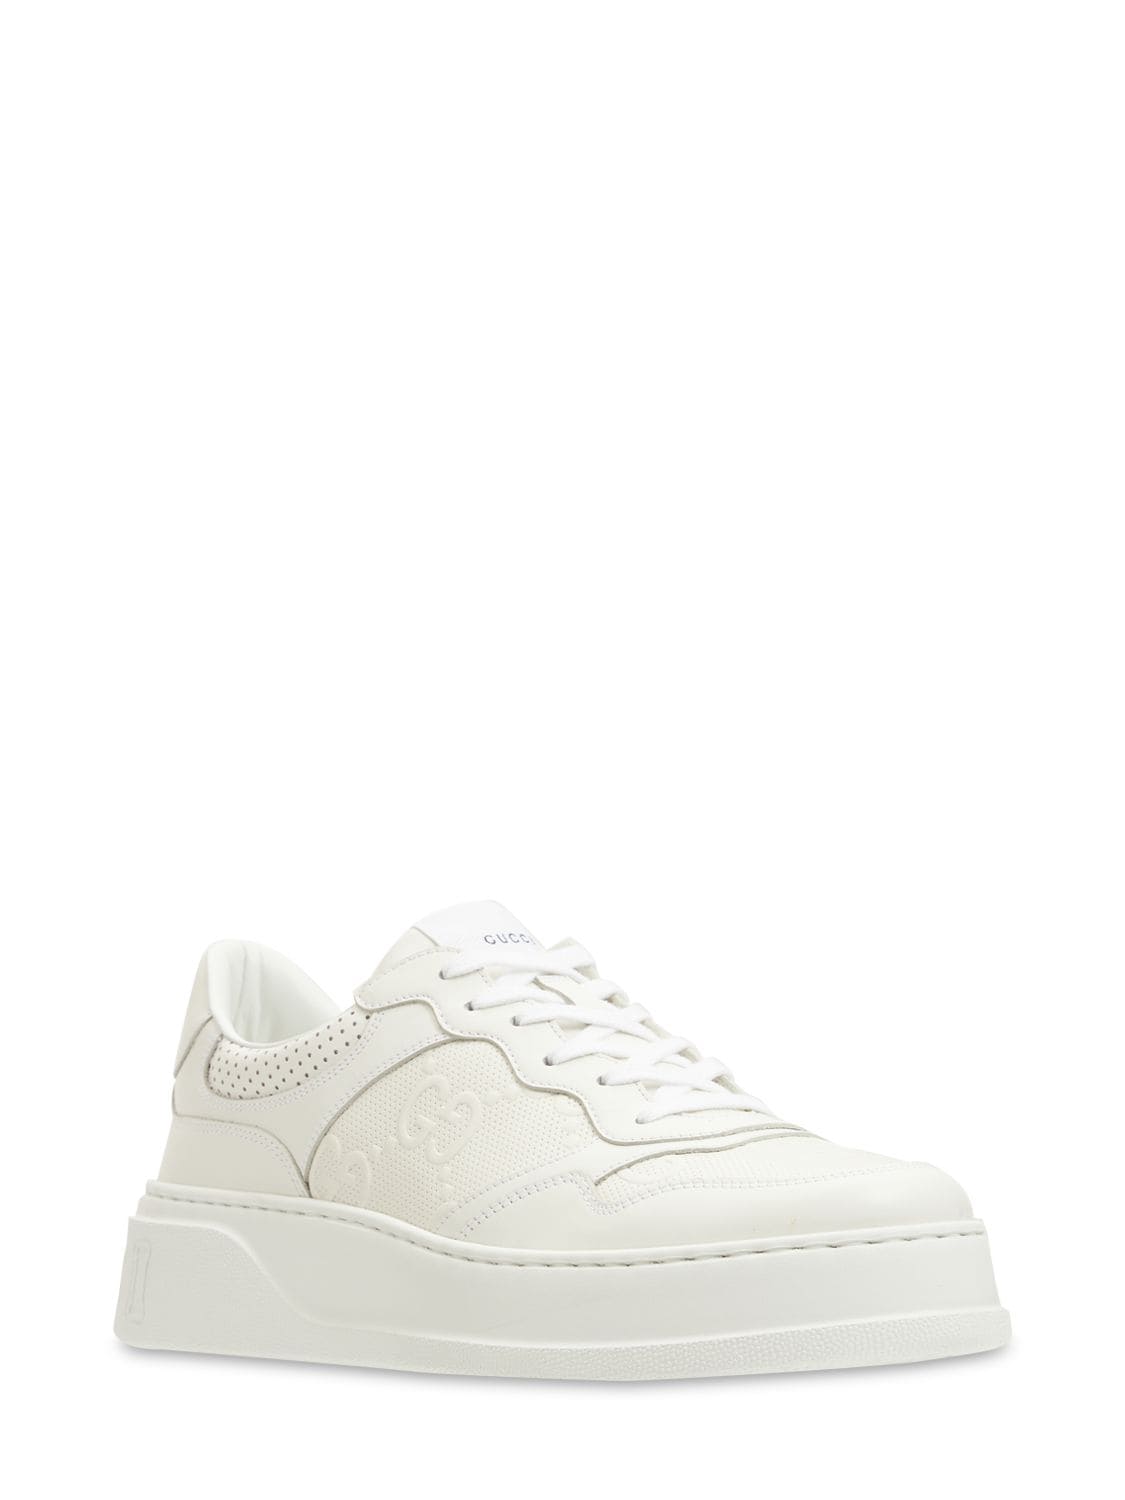 Shop Gucci Gg Embossed Leather Sneakers In White